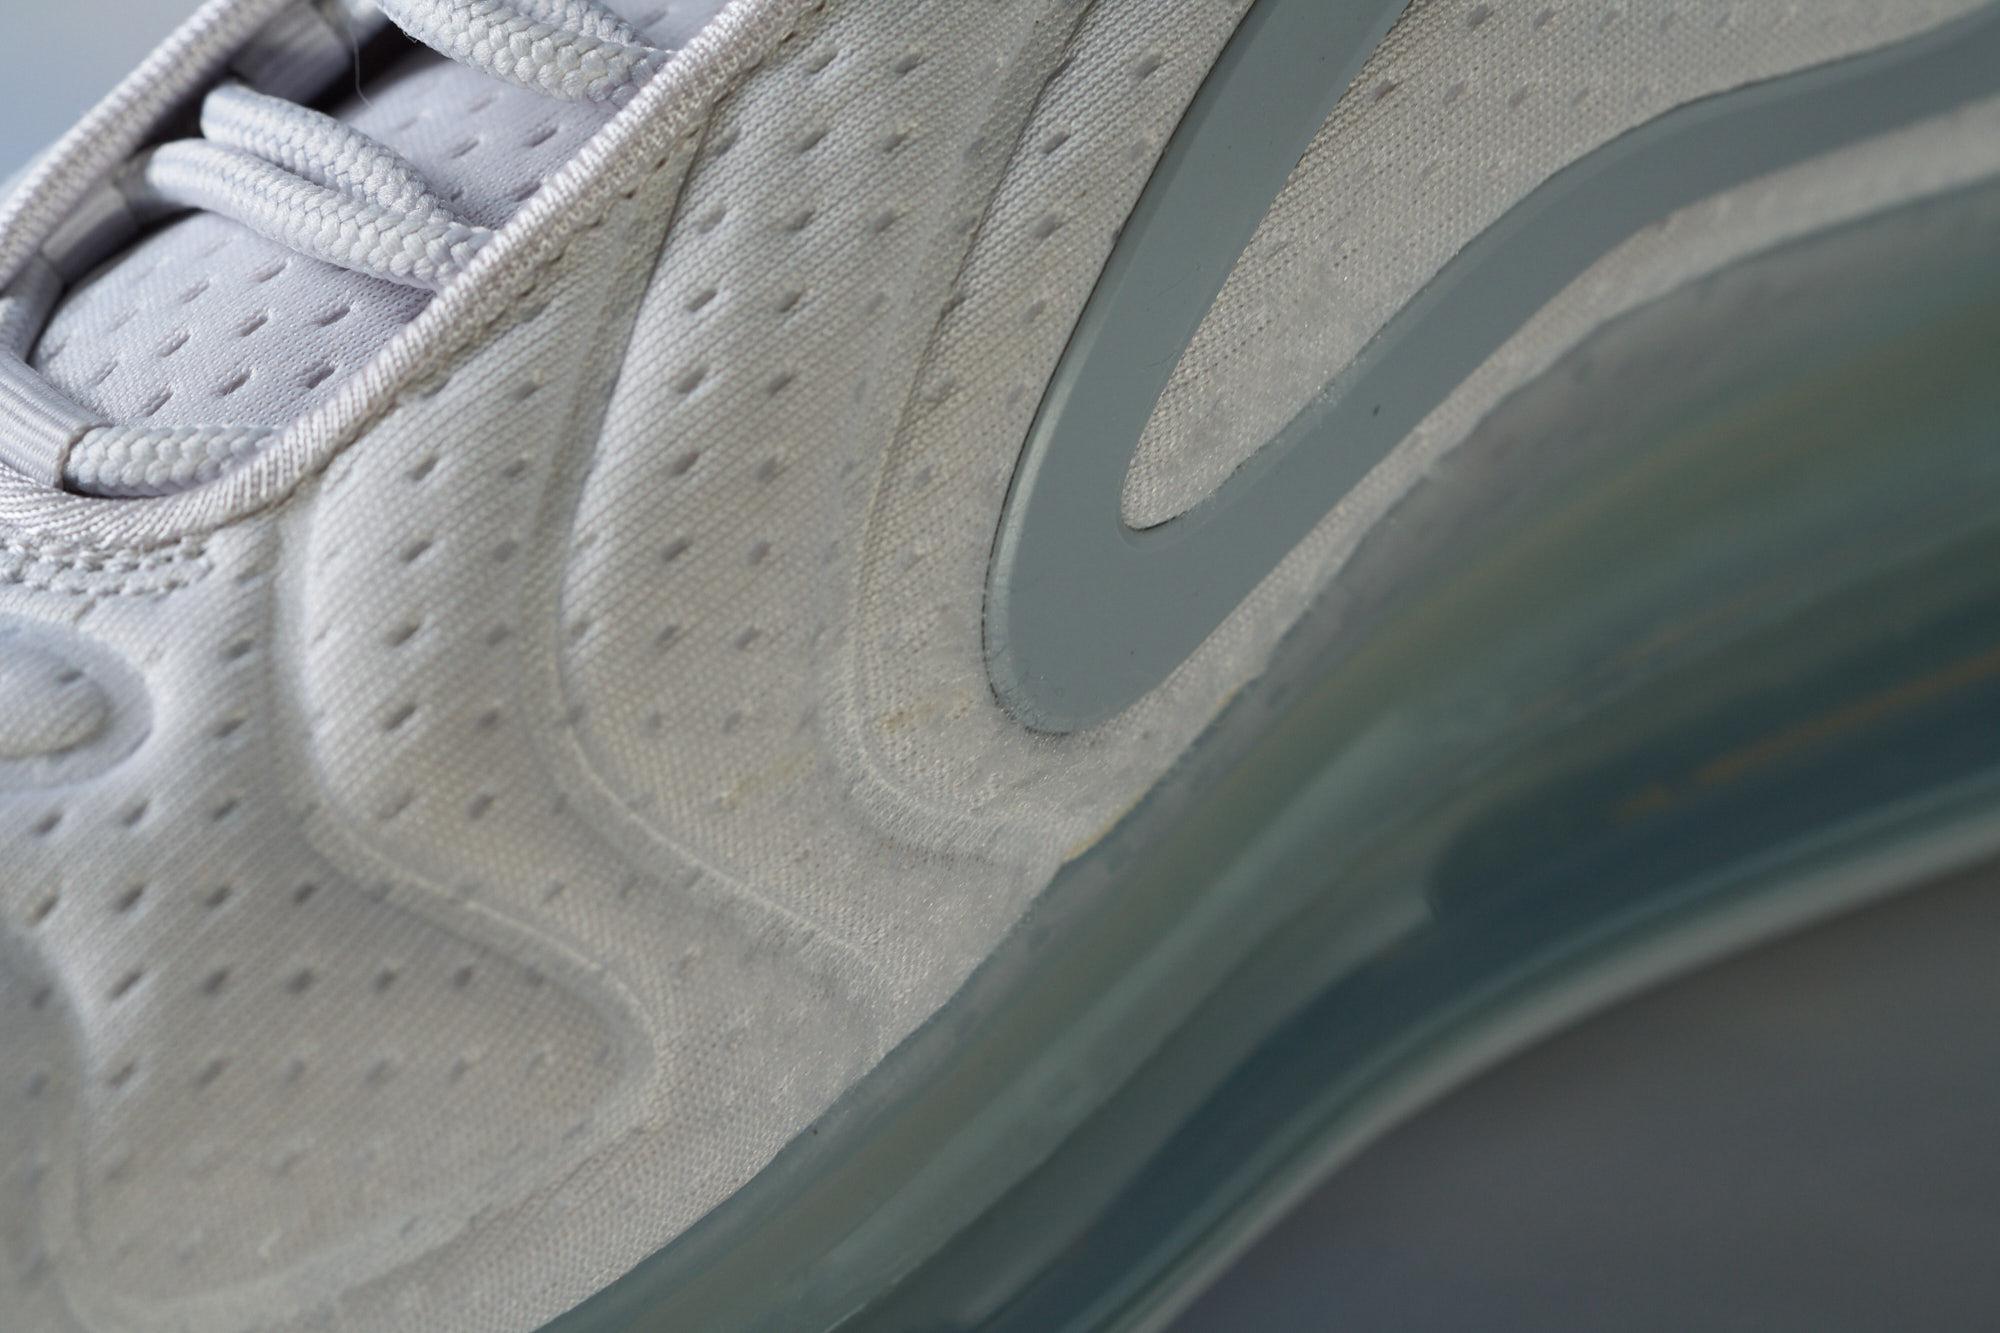 WHAT SUCKS ABOUT THE NIKE AIR MAX 720 (AFTER 2 WEEKS OF WEAR) 